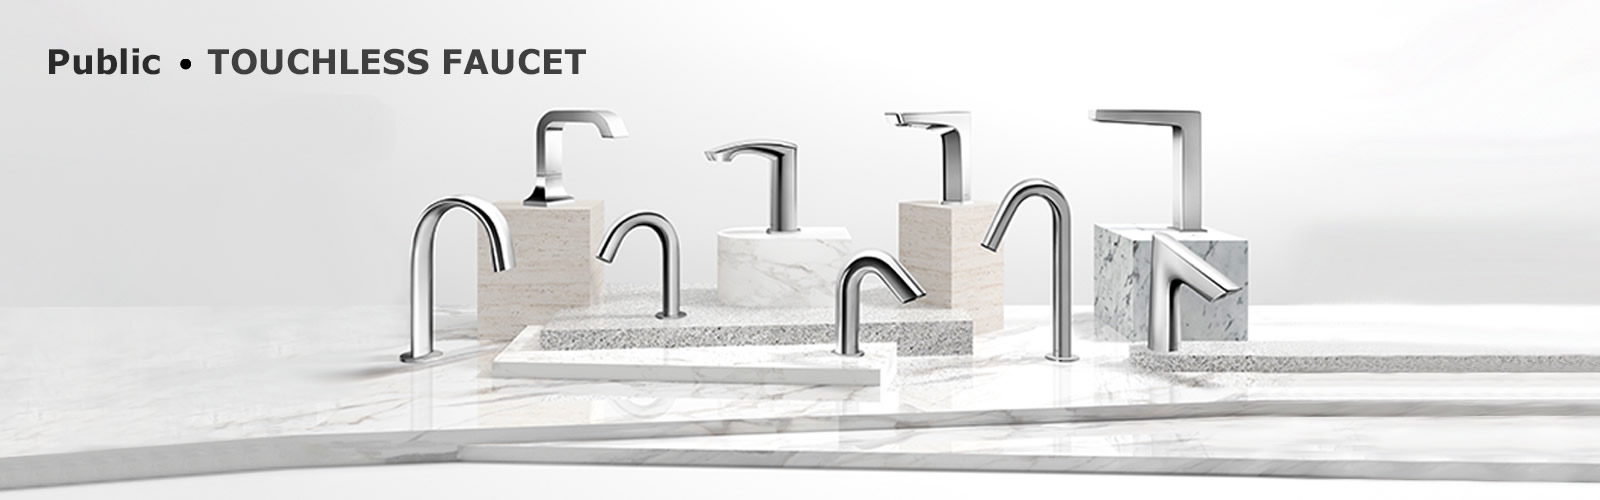 Image of TOUCHLESS FAUCET